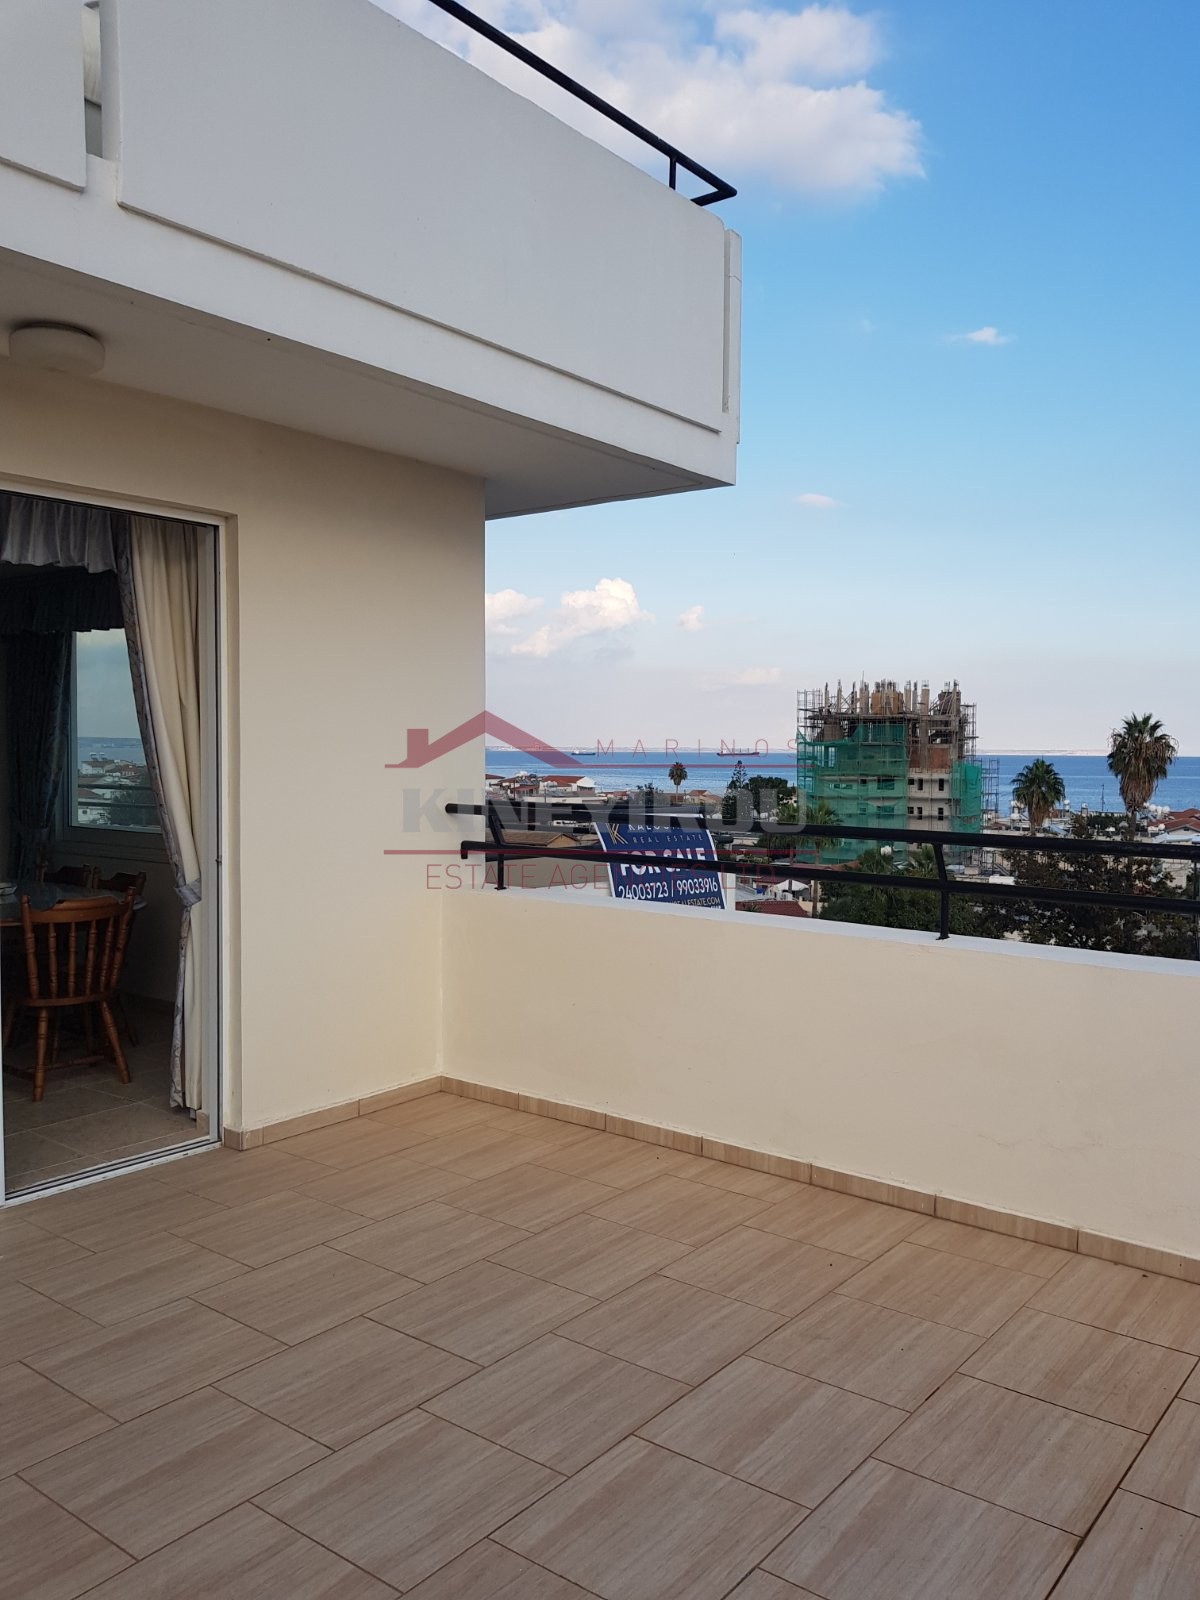 Three Bedroom, Penthouse Apartment with Sea view in Makenzy, Larnaca.